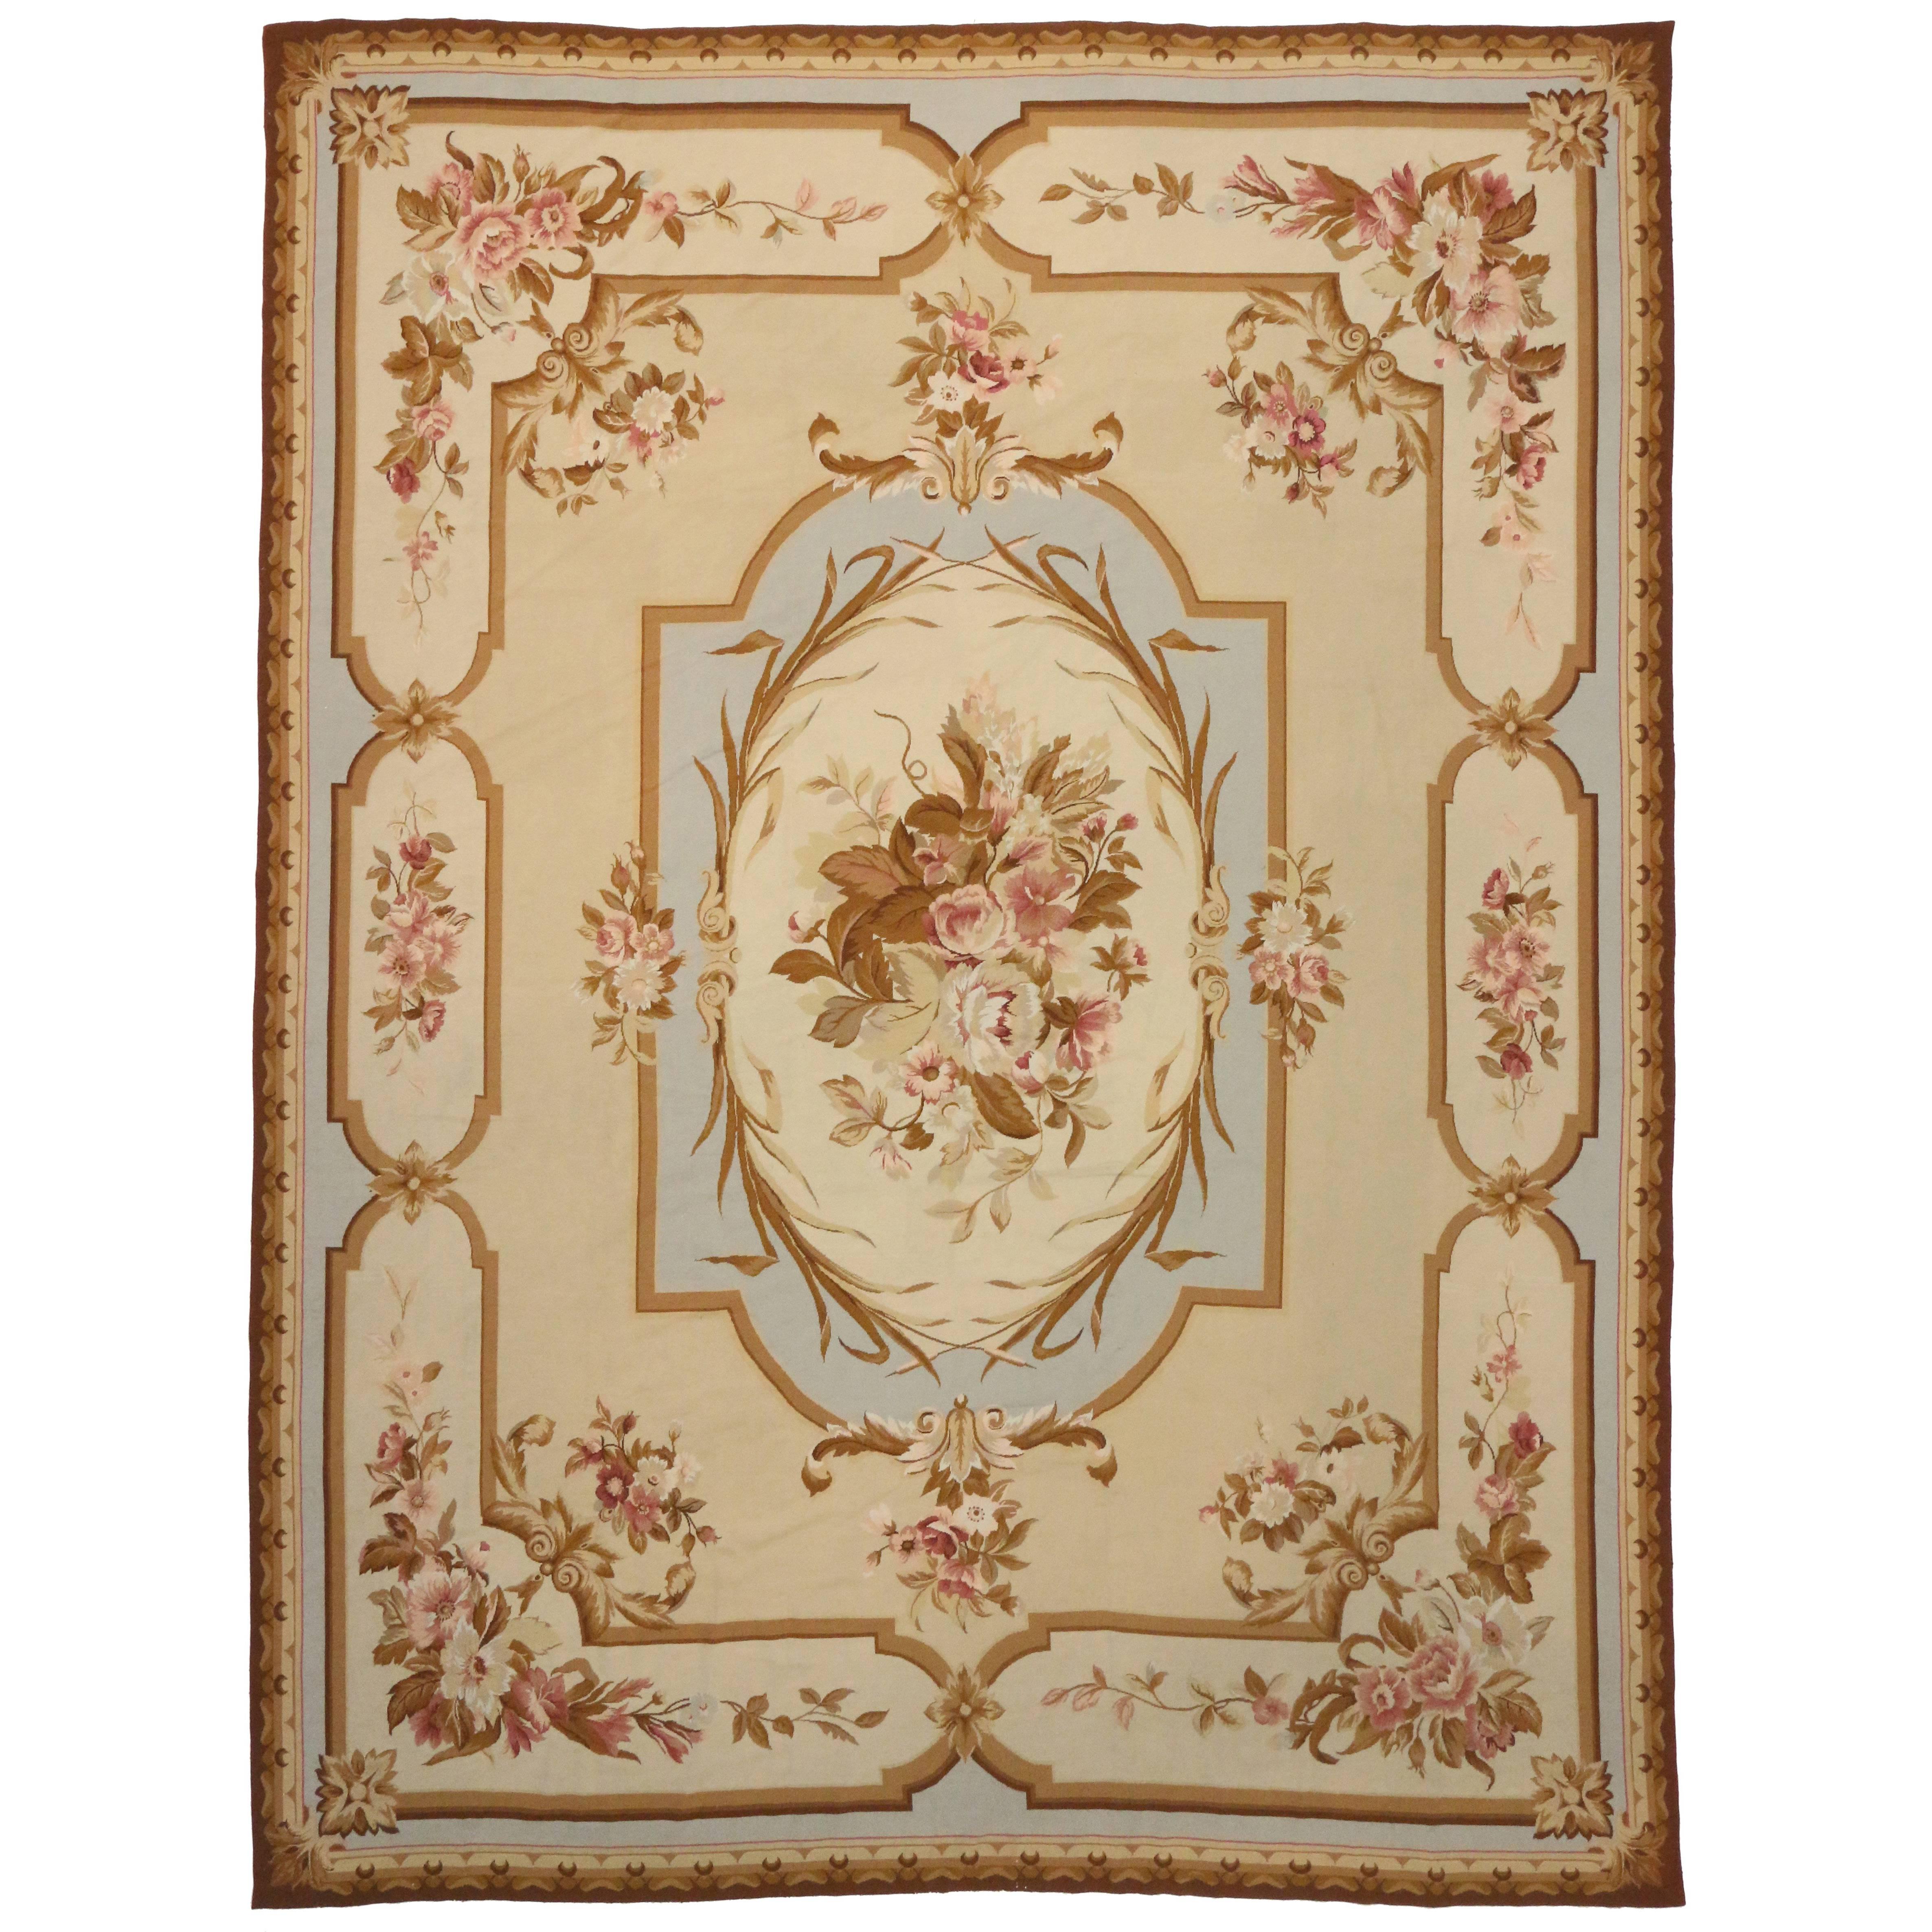 Vintage Chinese Needlepoint Rug with Aubusson Design and French Provincial Style